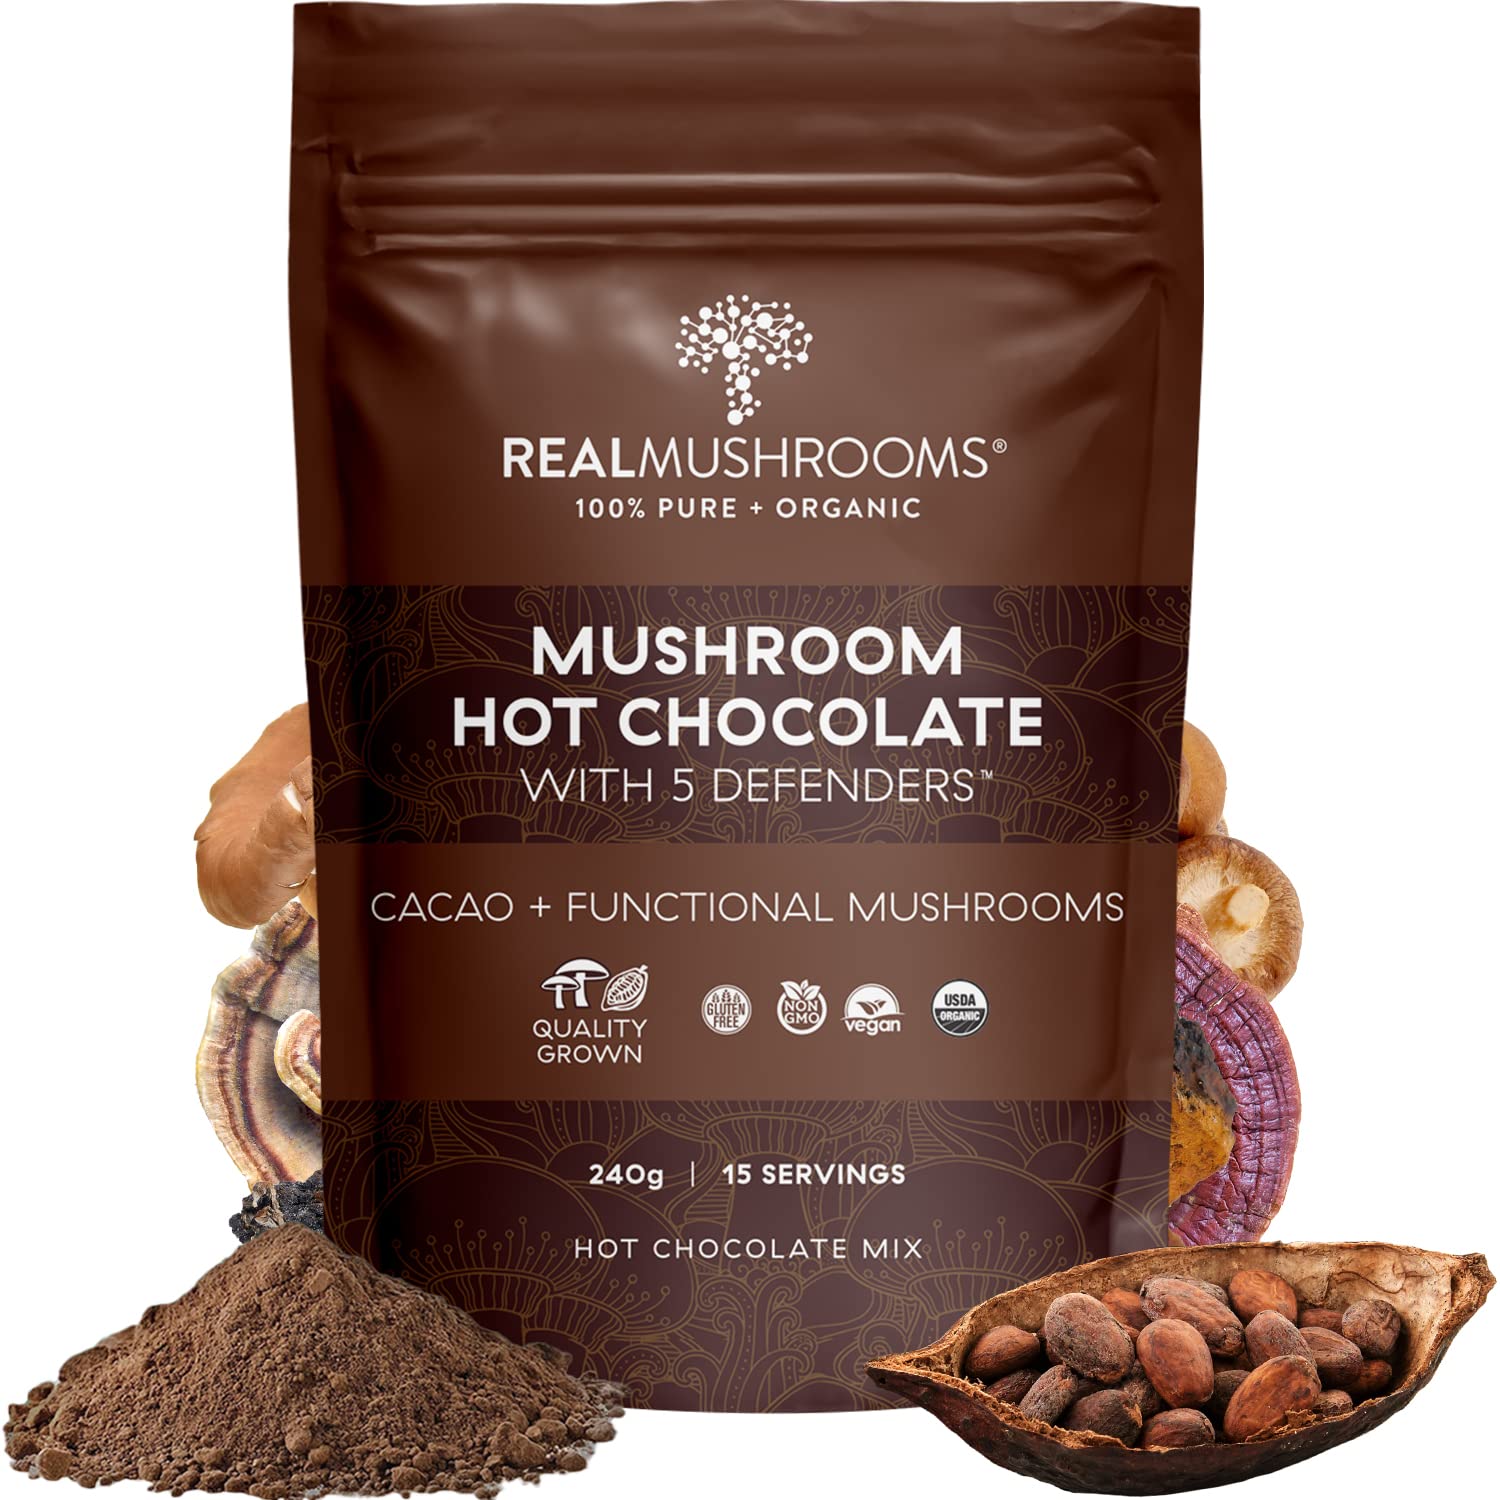 Real Mushrooms Hot Chocolate Mix (15 Servings) and Lion’s Mane (60 Servings) Powder Bundle - Mushroom Powder Supplement for Daily Immunity & Cognition Support - Gluten-Free, Non-GMO, Vegan